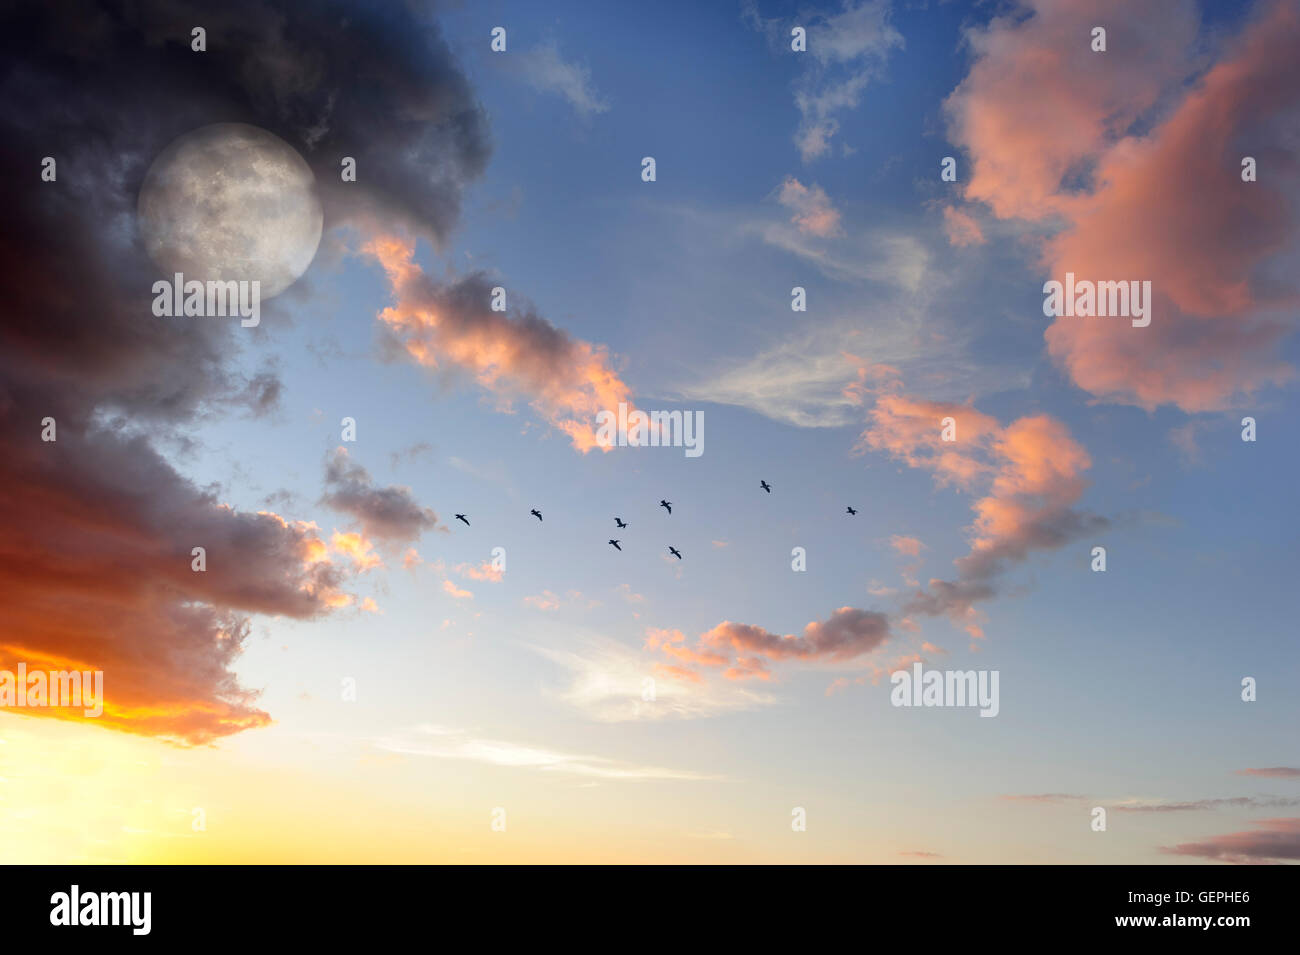 Moon clouds skies is a vibrant surreal fantasy like cloudscape with the ethereal heavenly full moon rising. Stock Photo